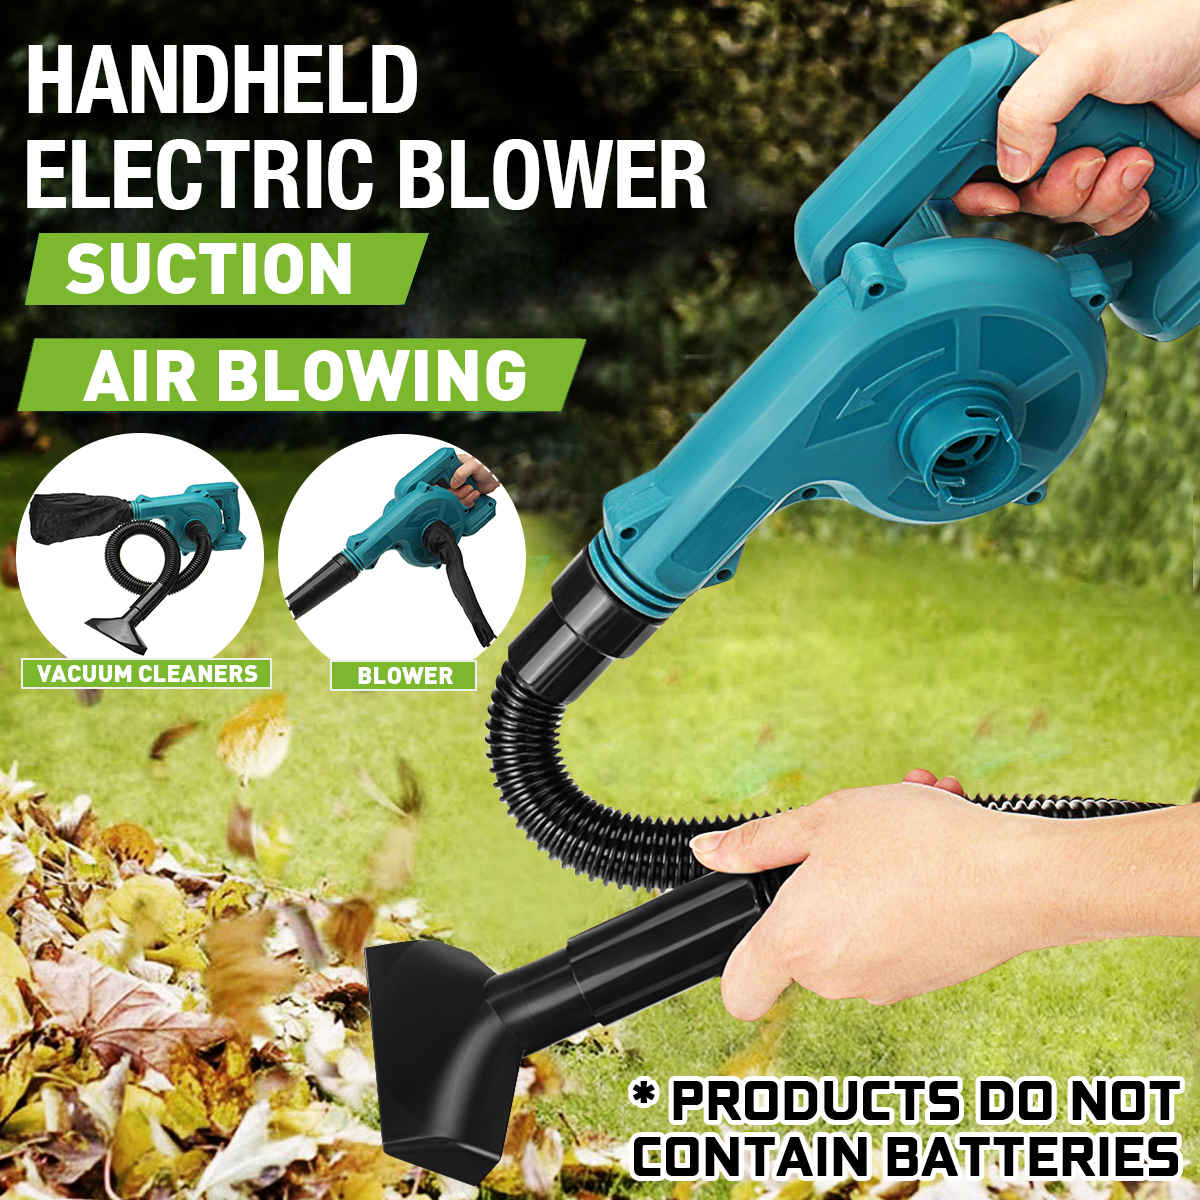 2-in-1-Electric-Air-Blower-Vacuum-Cleaner-Handheld-Dust-Collecting-Tool-For-Makita-18V-Battery-1771460-1